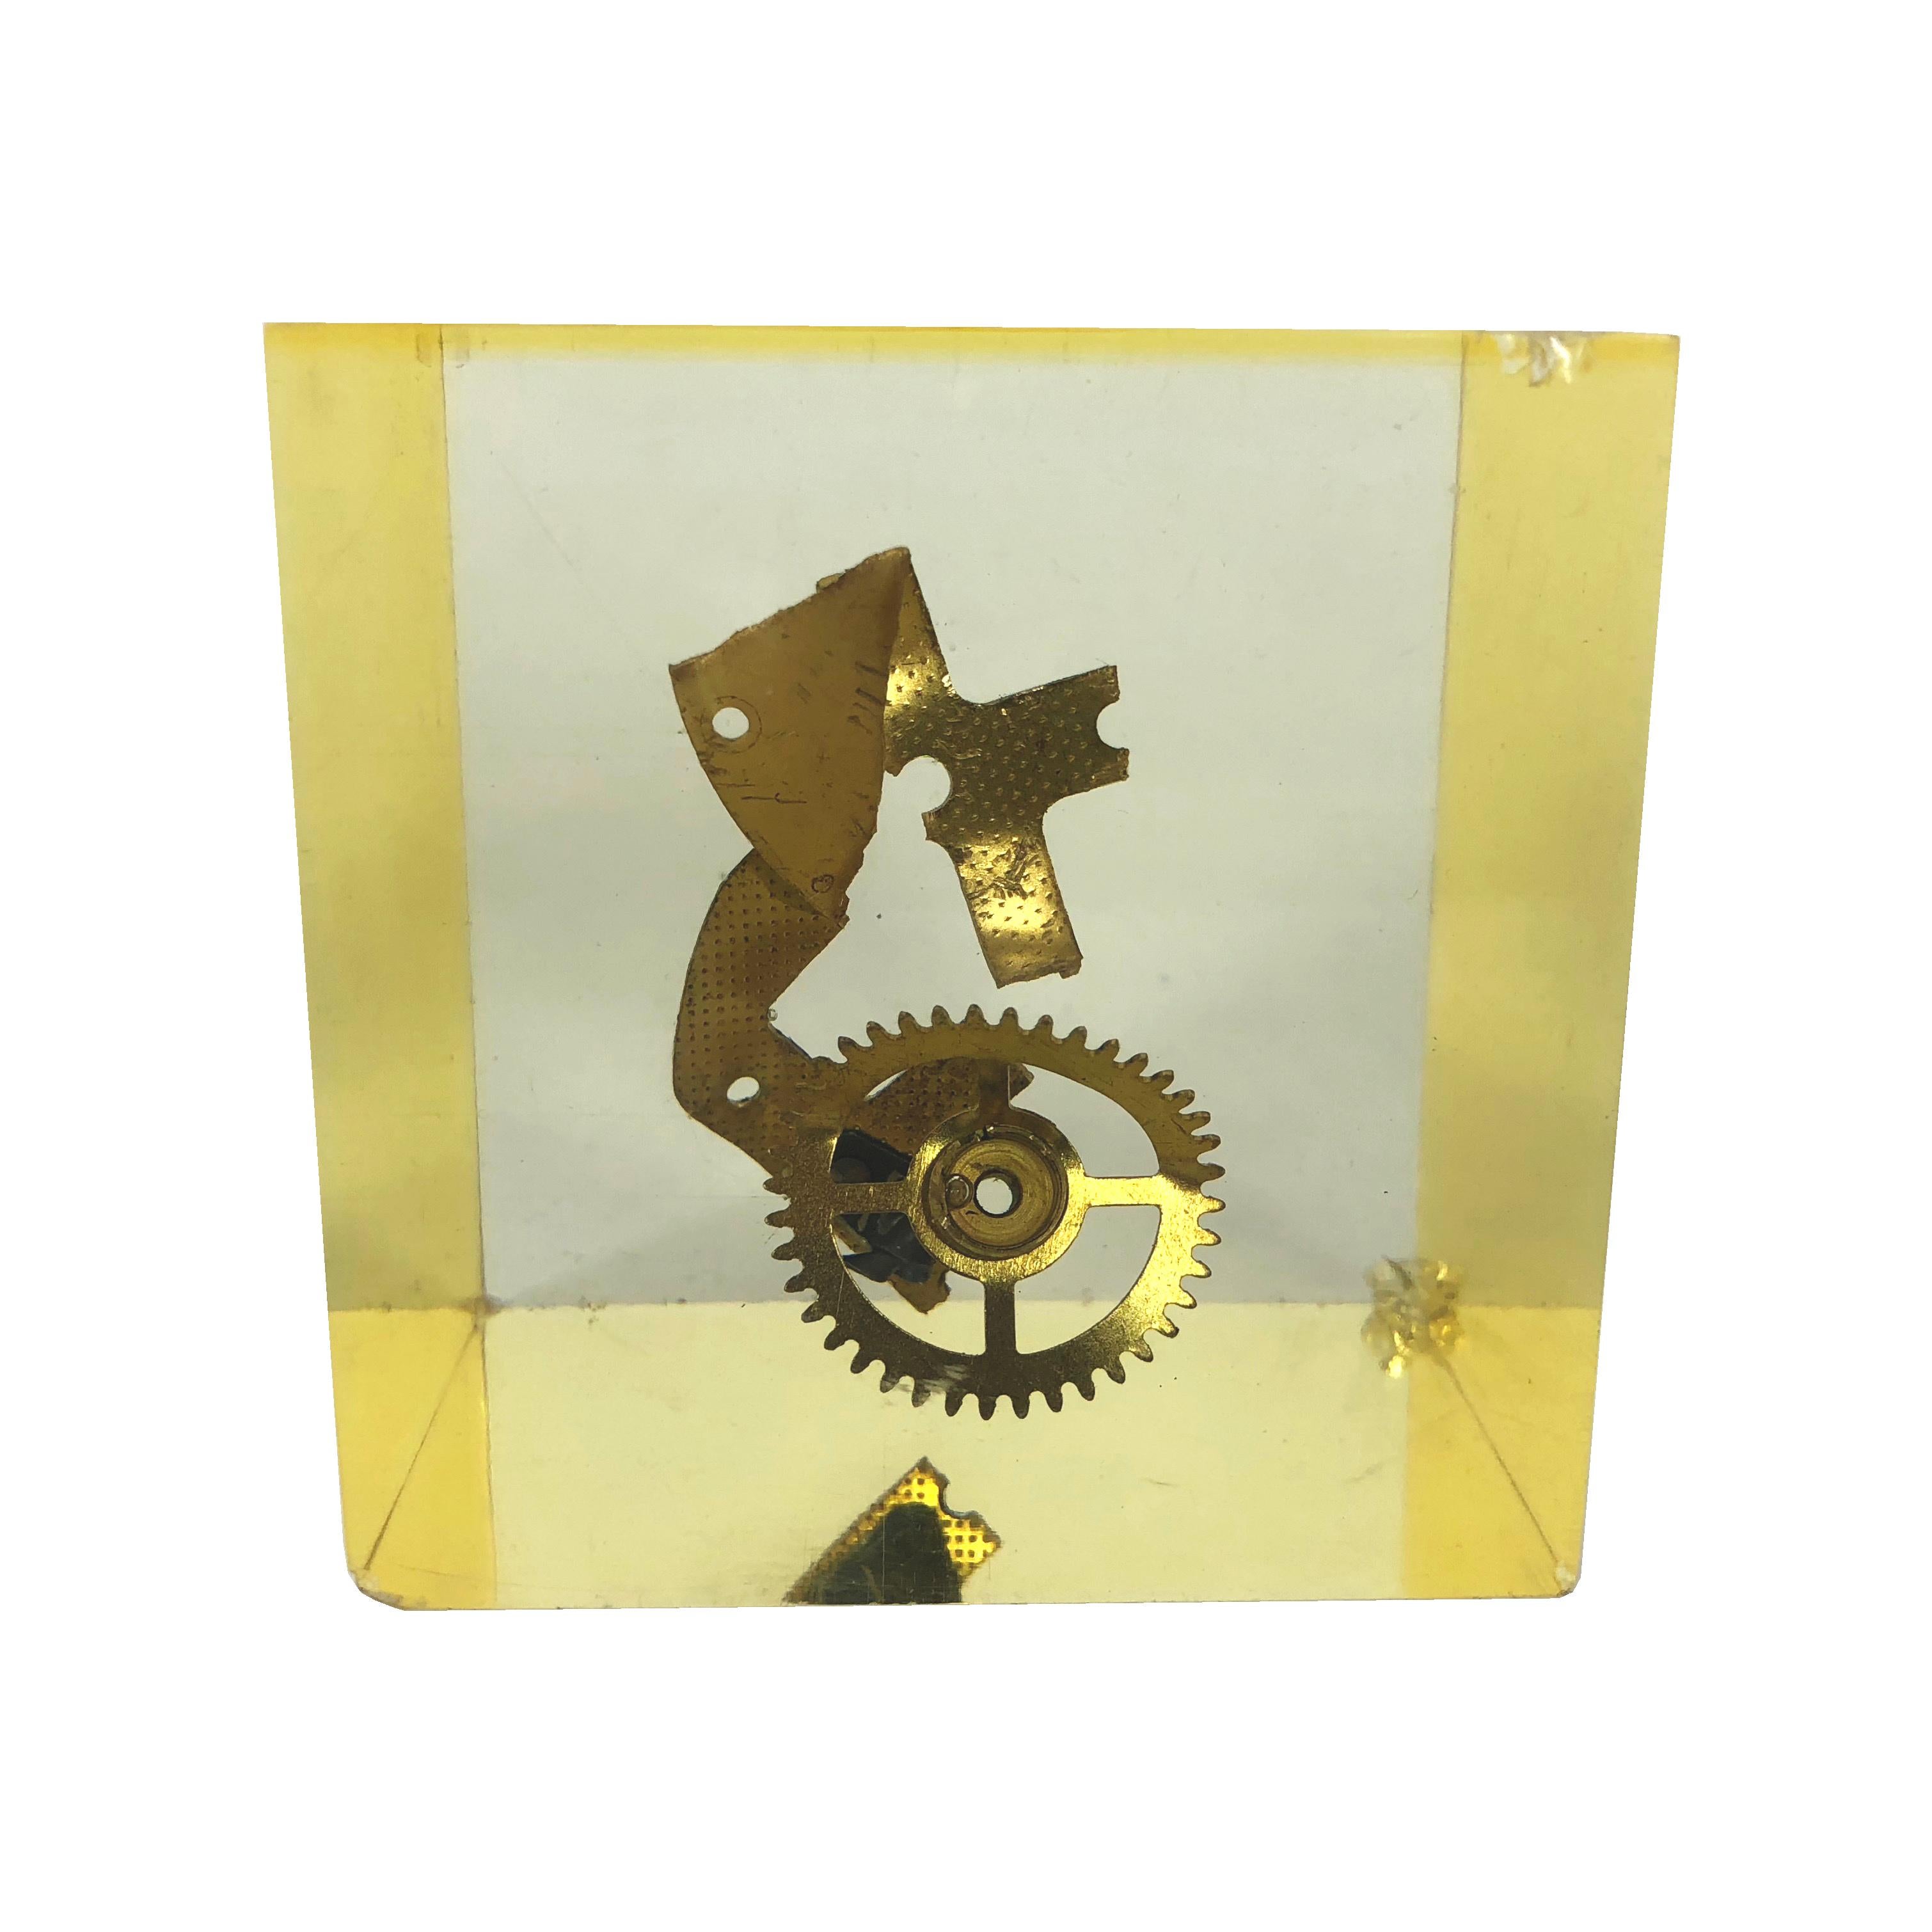 French Modernist Lucite Resin Cube Sculpture with Gears Pierre Giraudon, France, 1970s For Sale